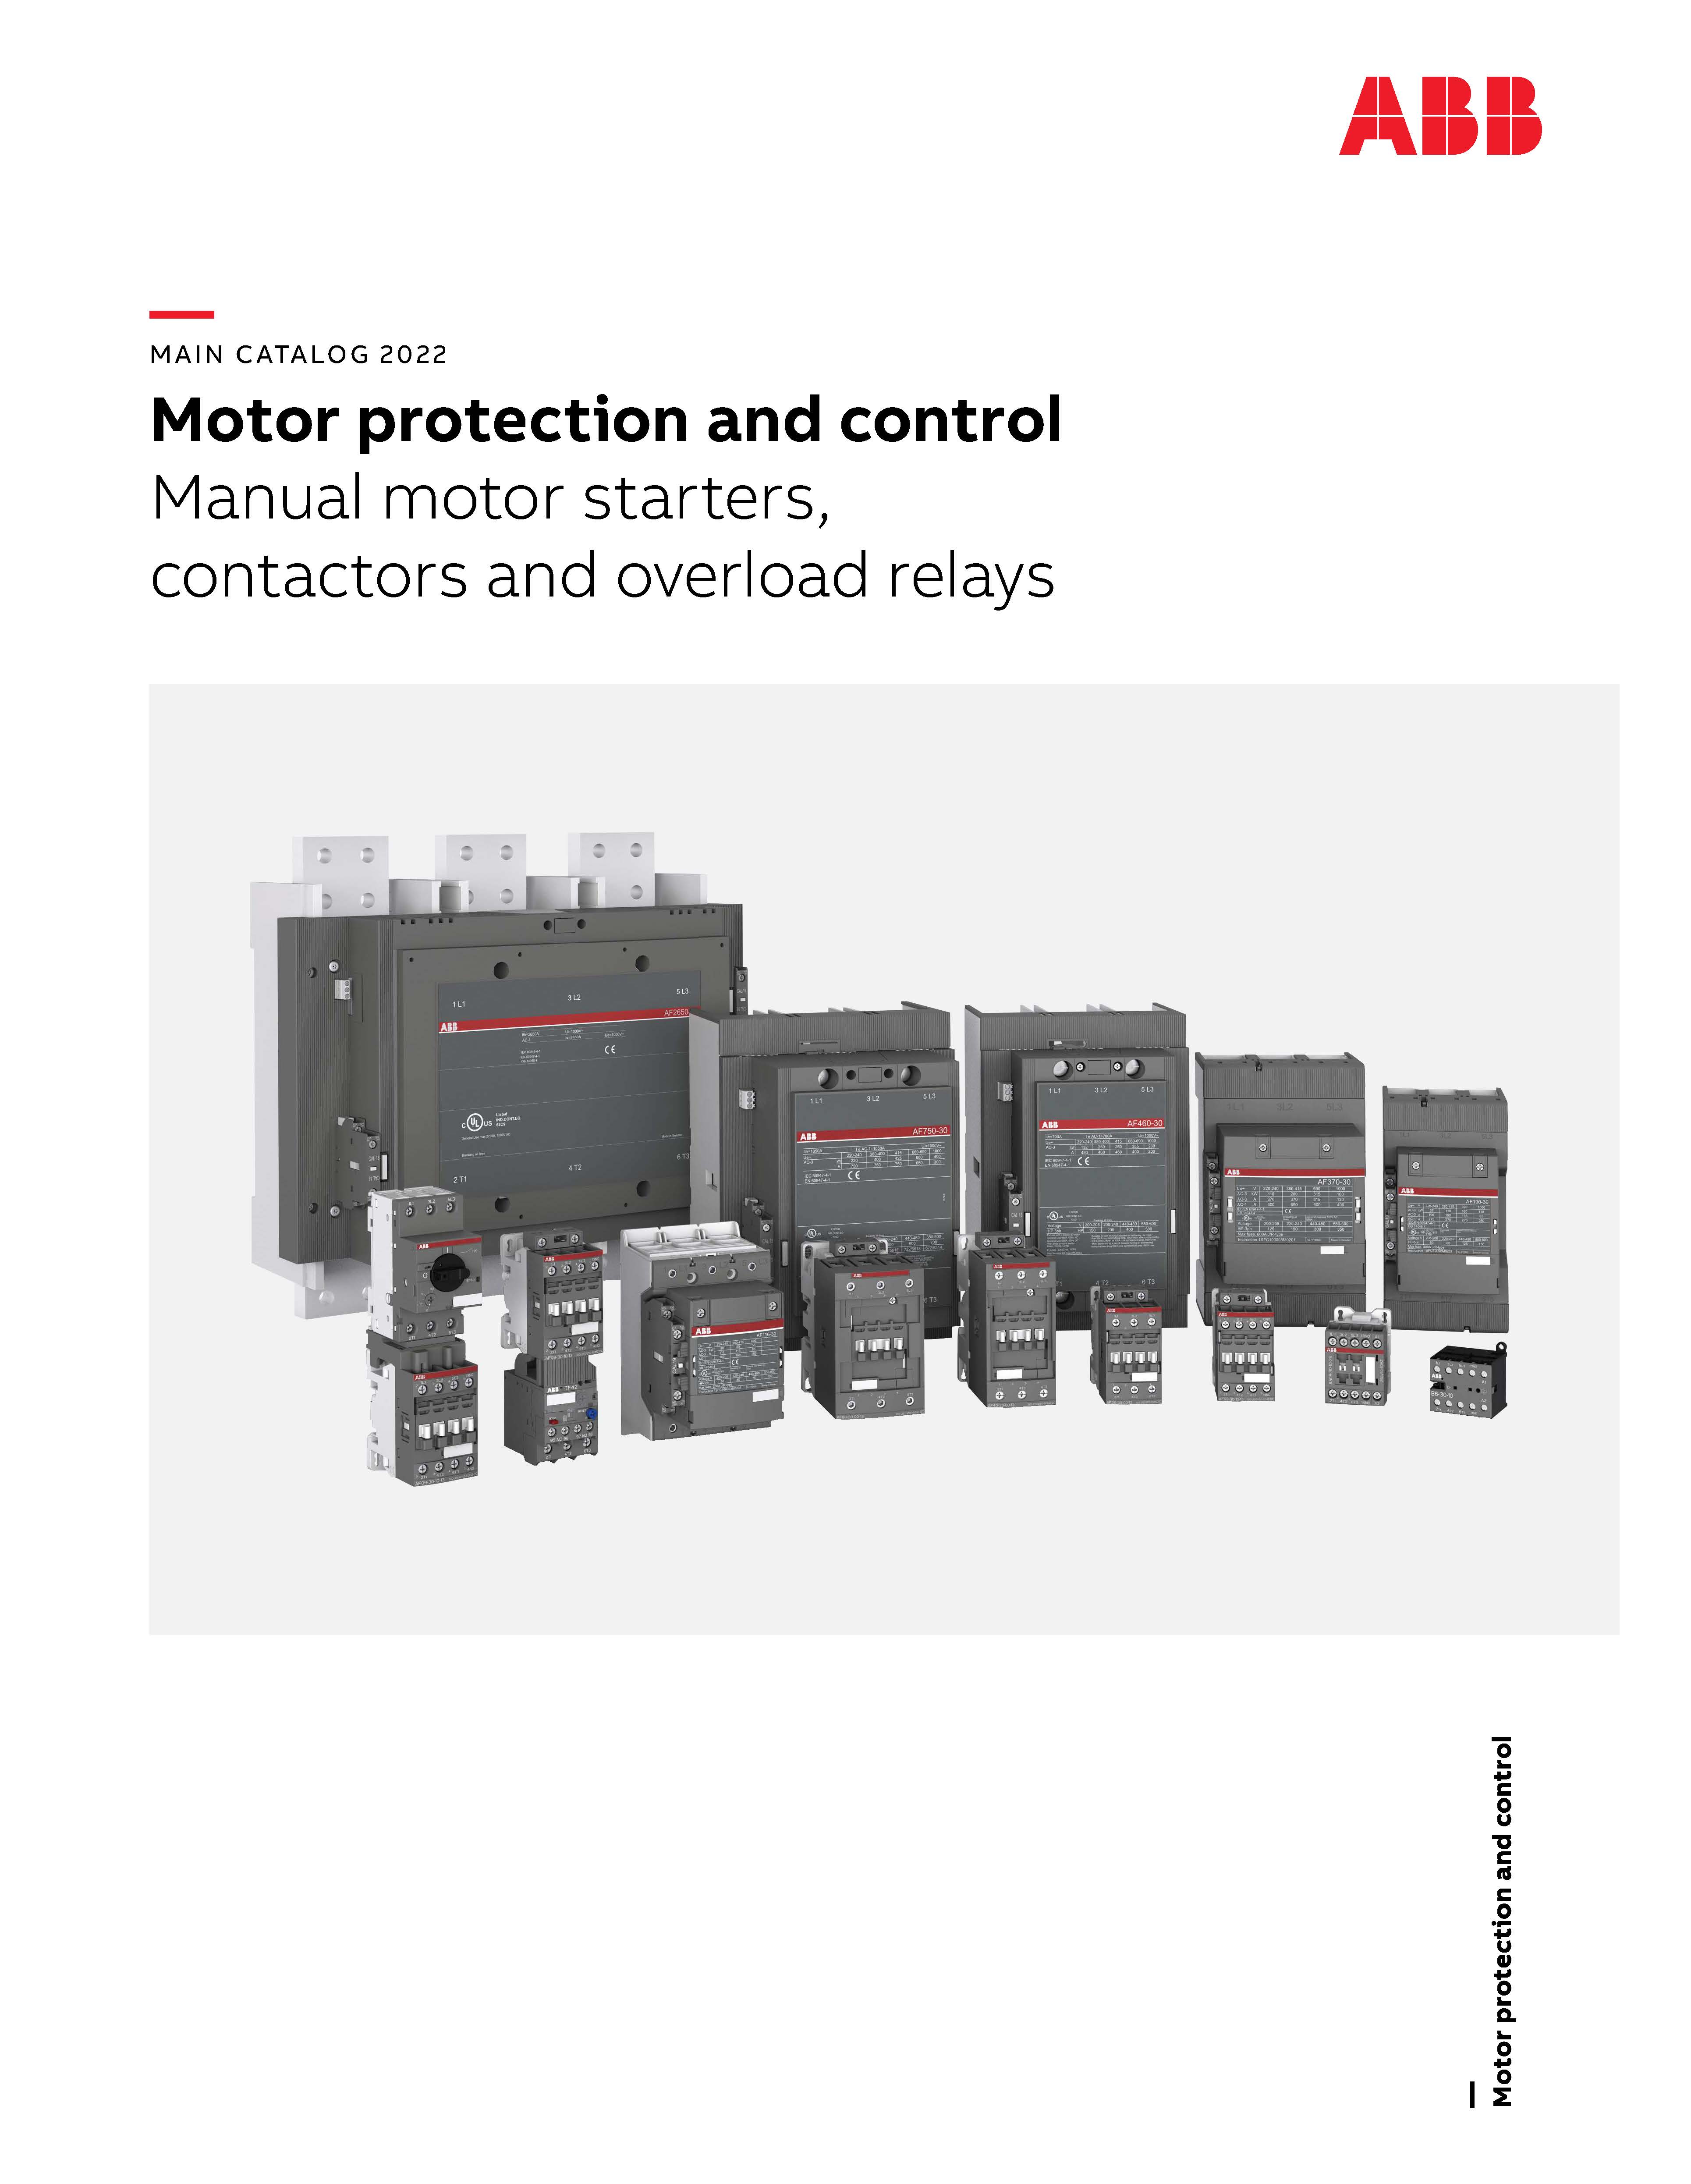 Motor protection and control